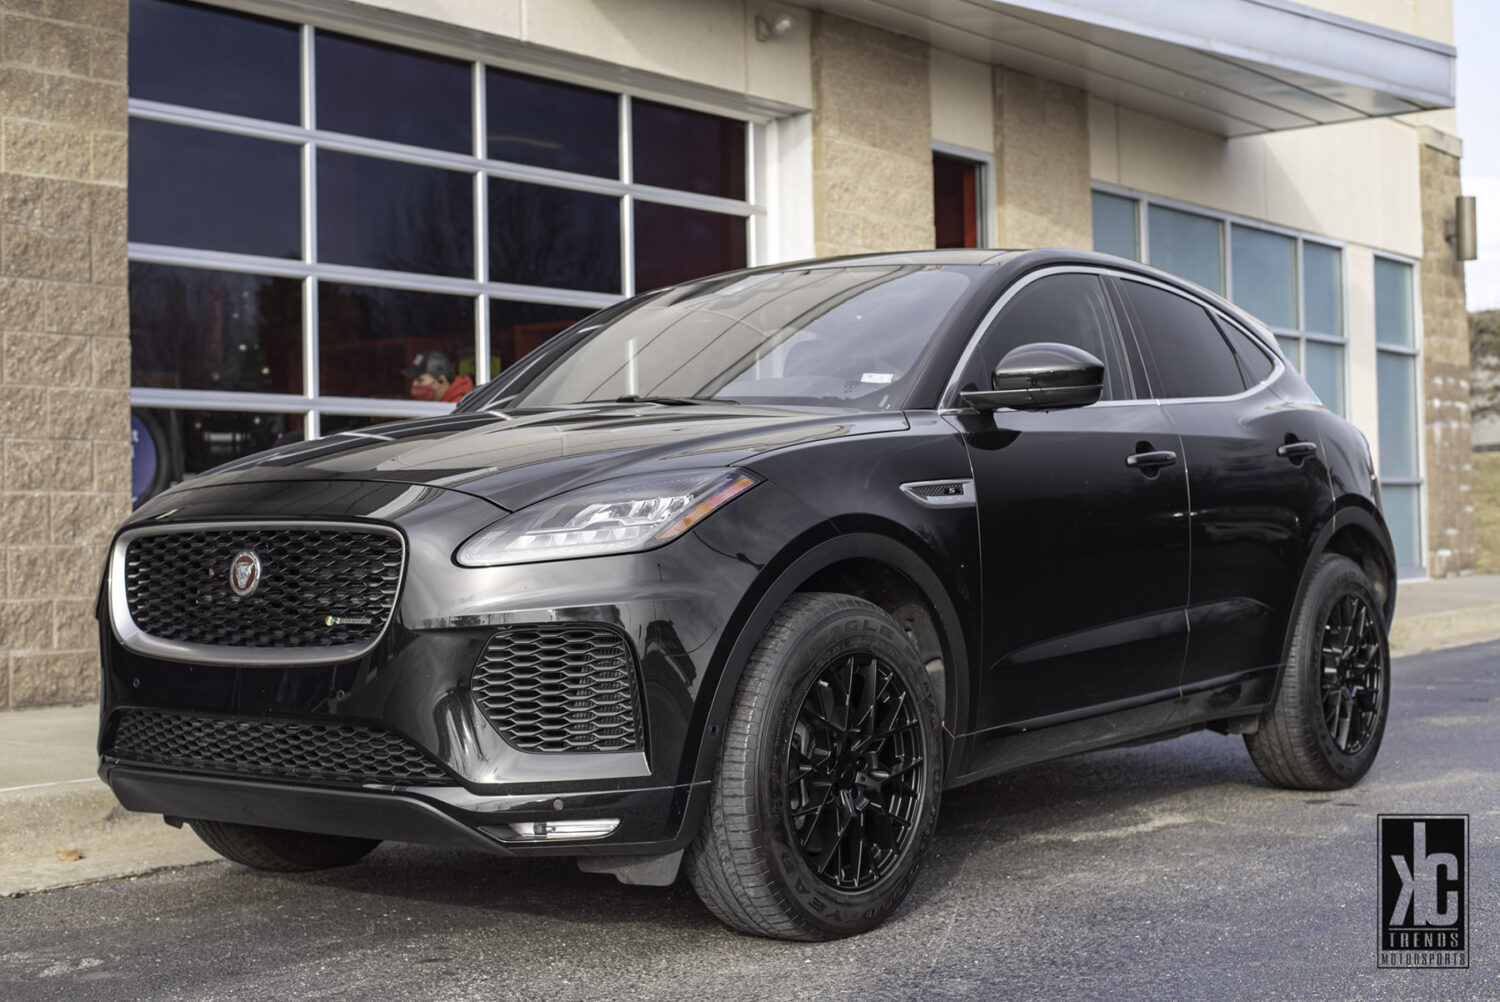 Jaguar E-Pace with 18×8.5-inch TSW Sebring